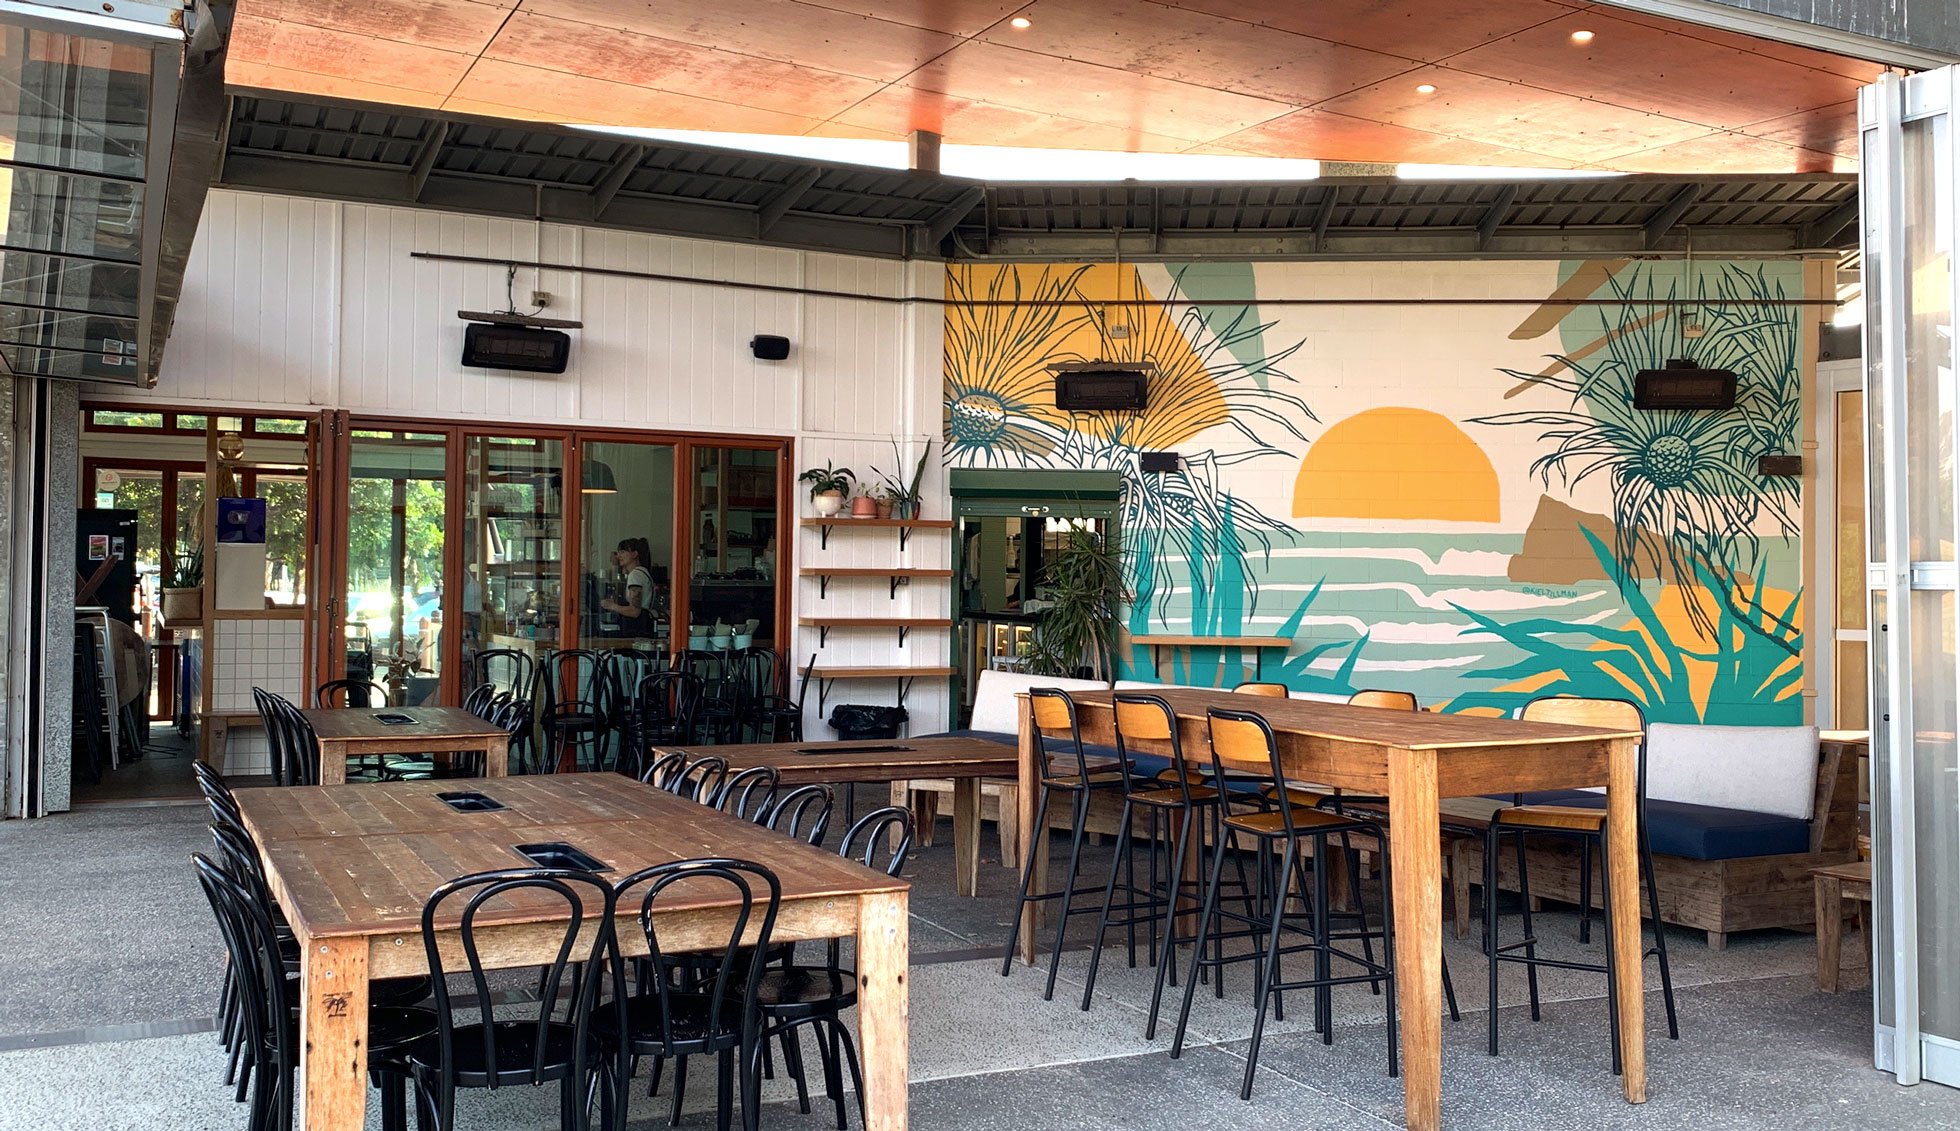 The mural features pandanus trees, a surfbreak and a sunrise in blues, aquas and yellow